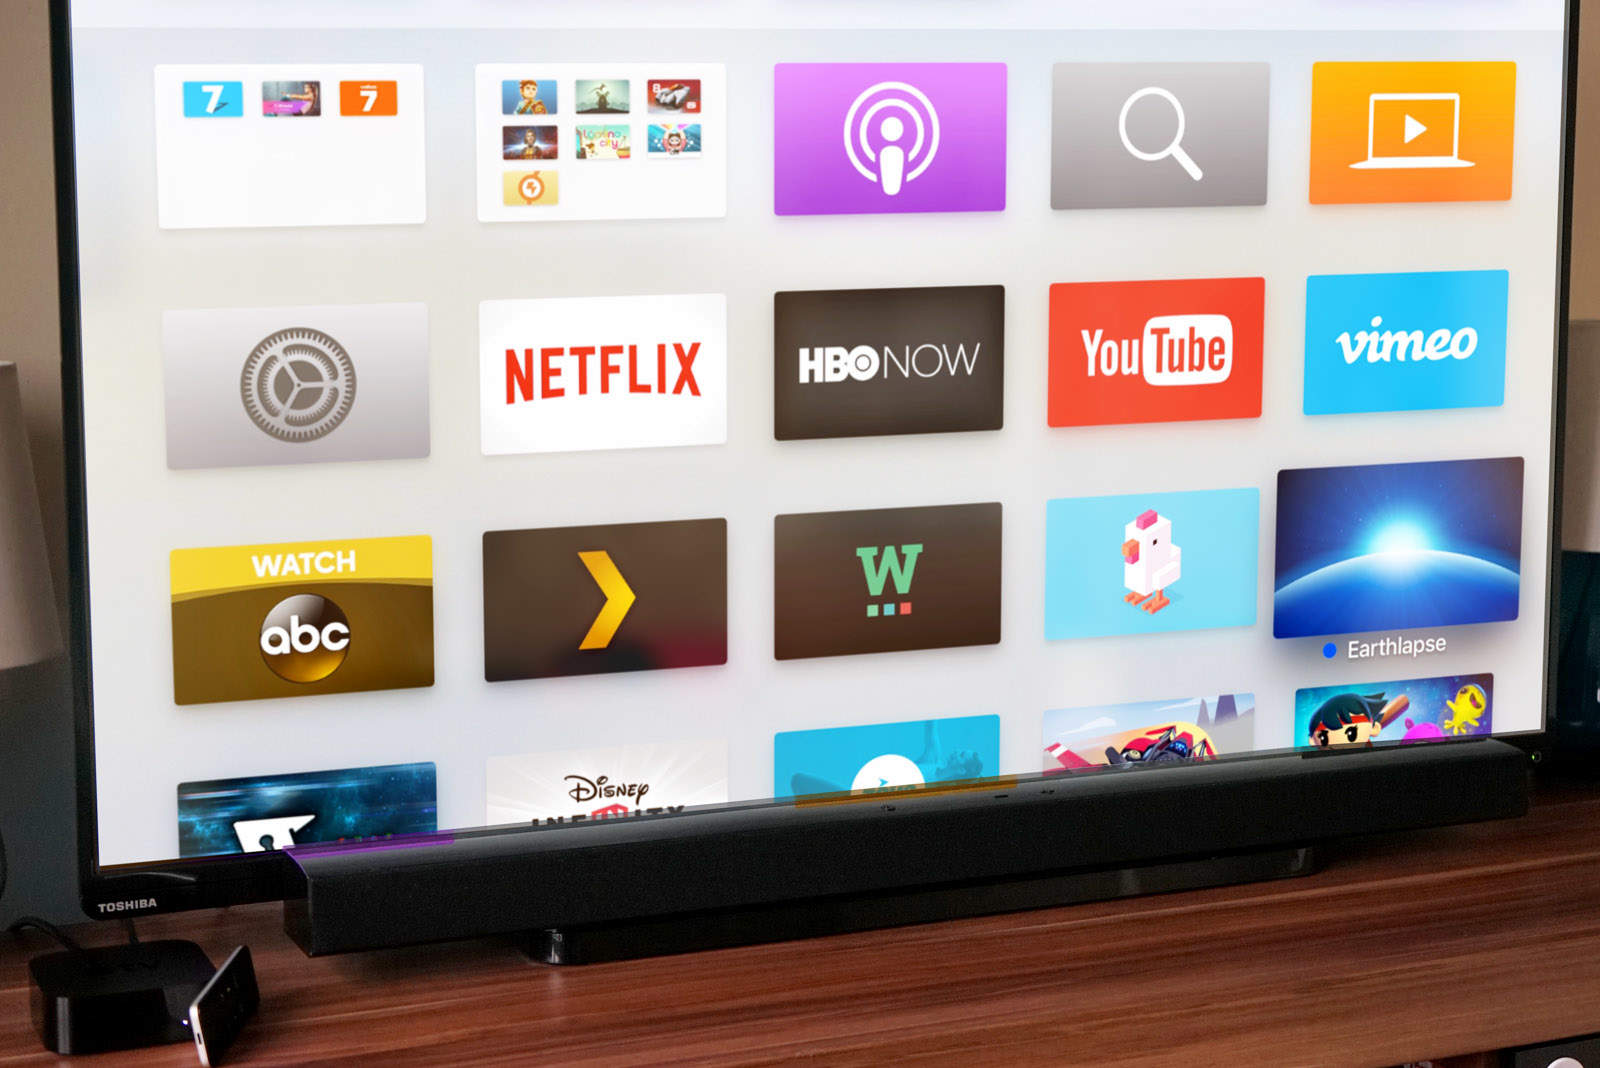 Get your OCD on with folders on Apple TV.